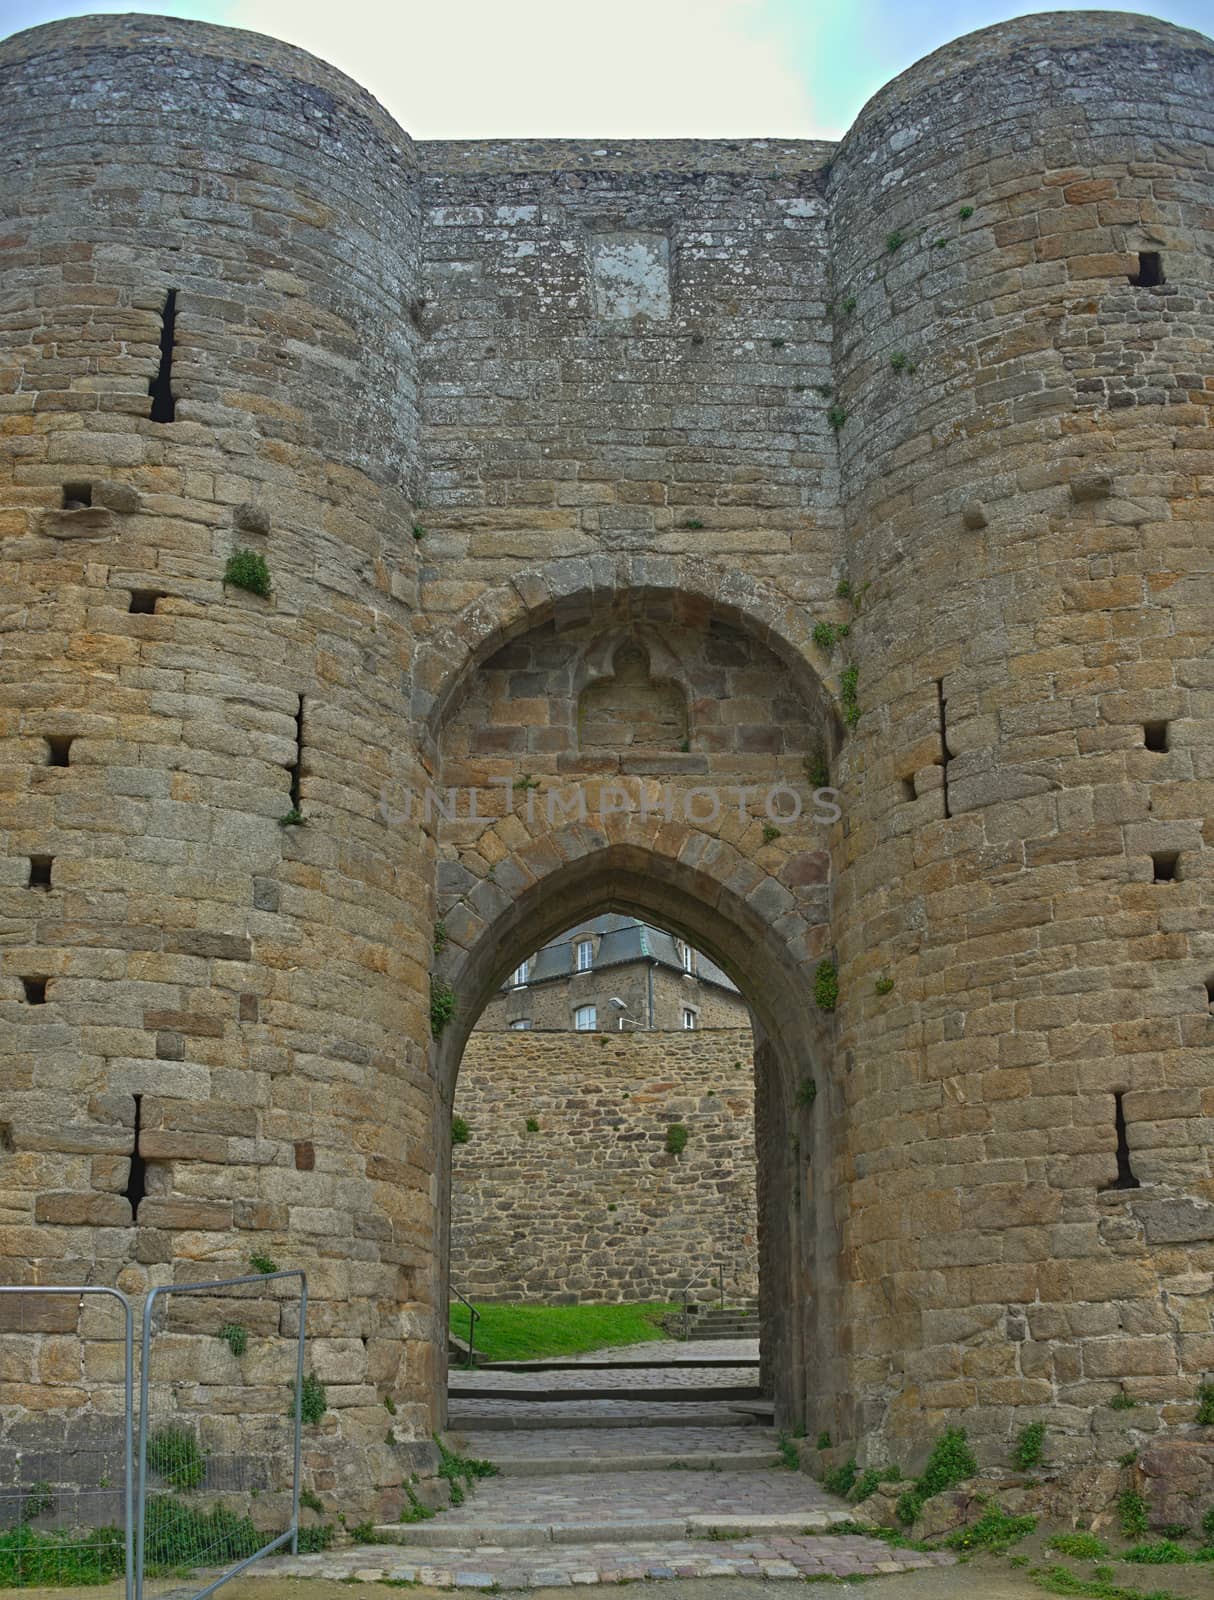 Big stone round towers and gate at Dinan fortress, France by sheriffkule